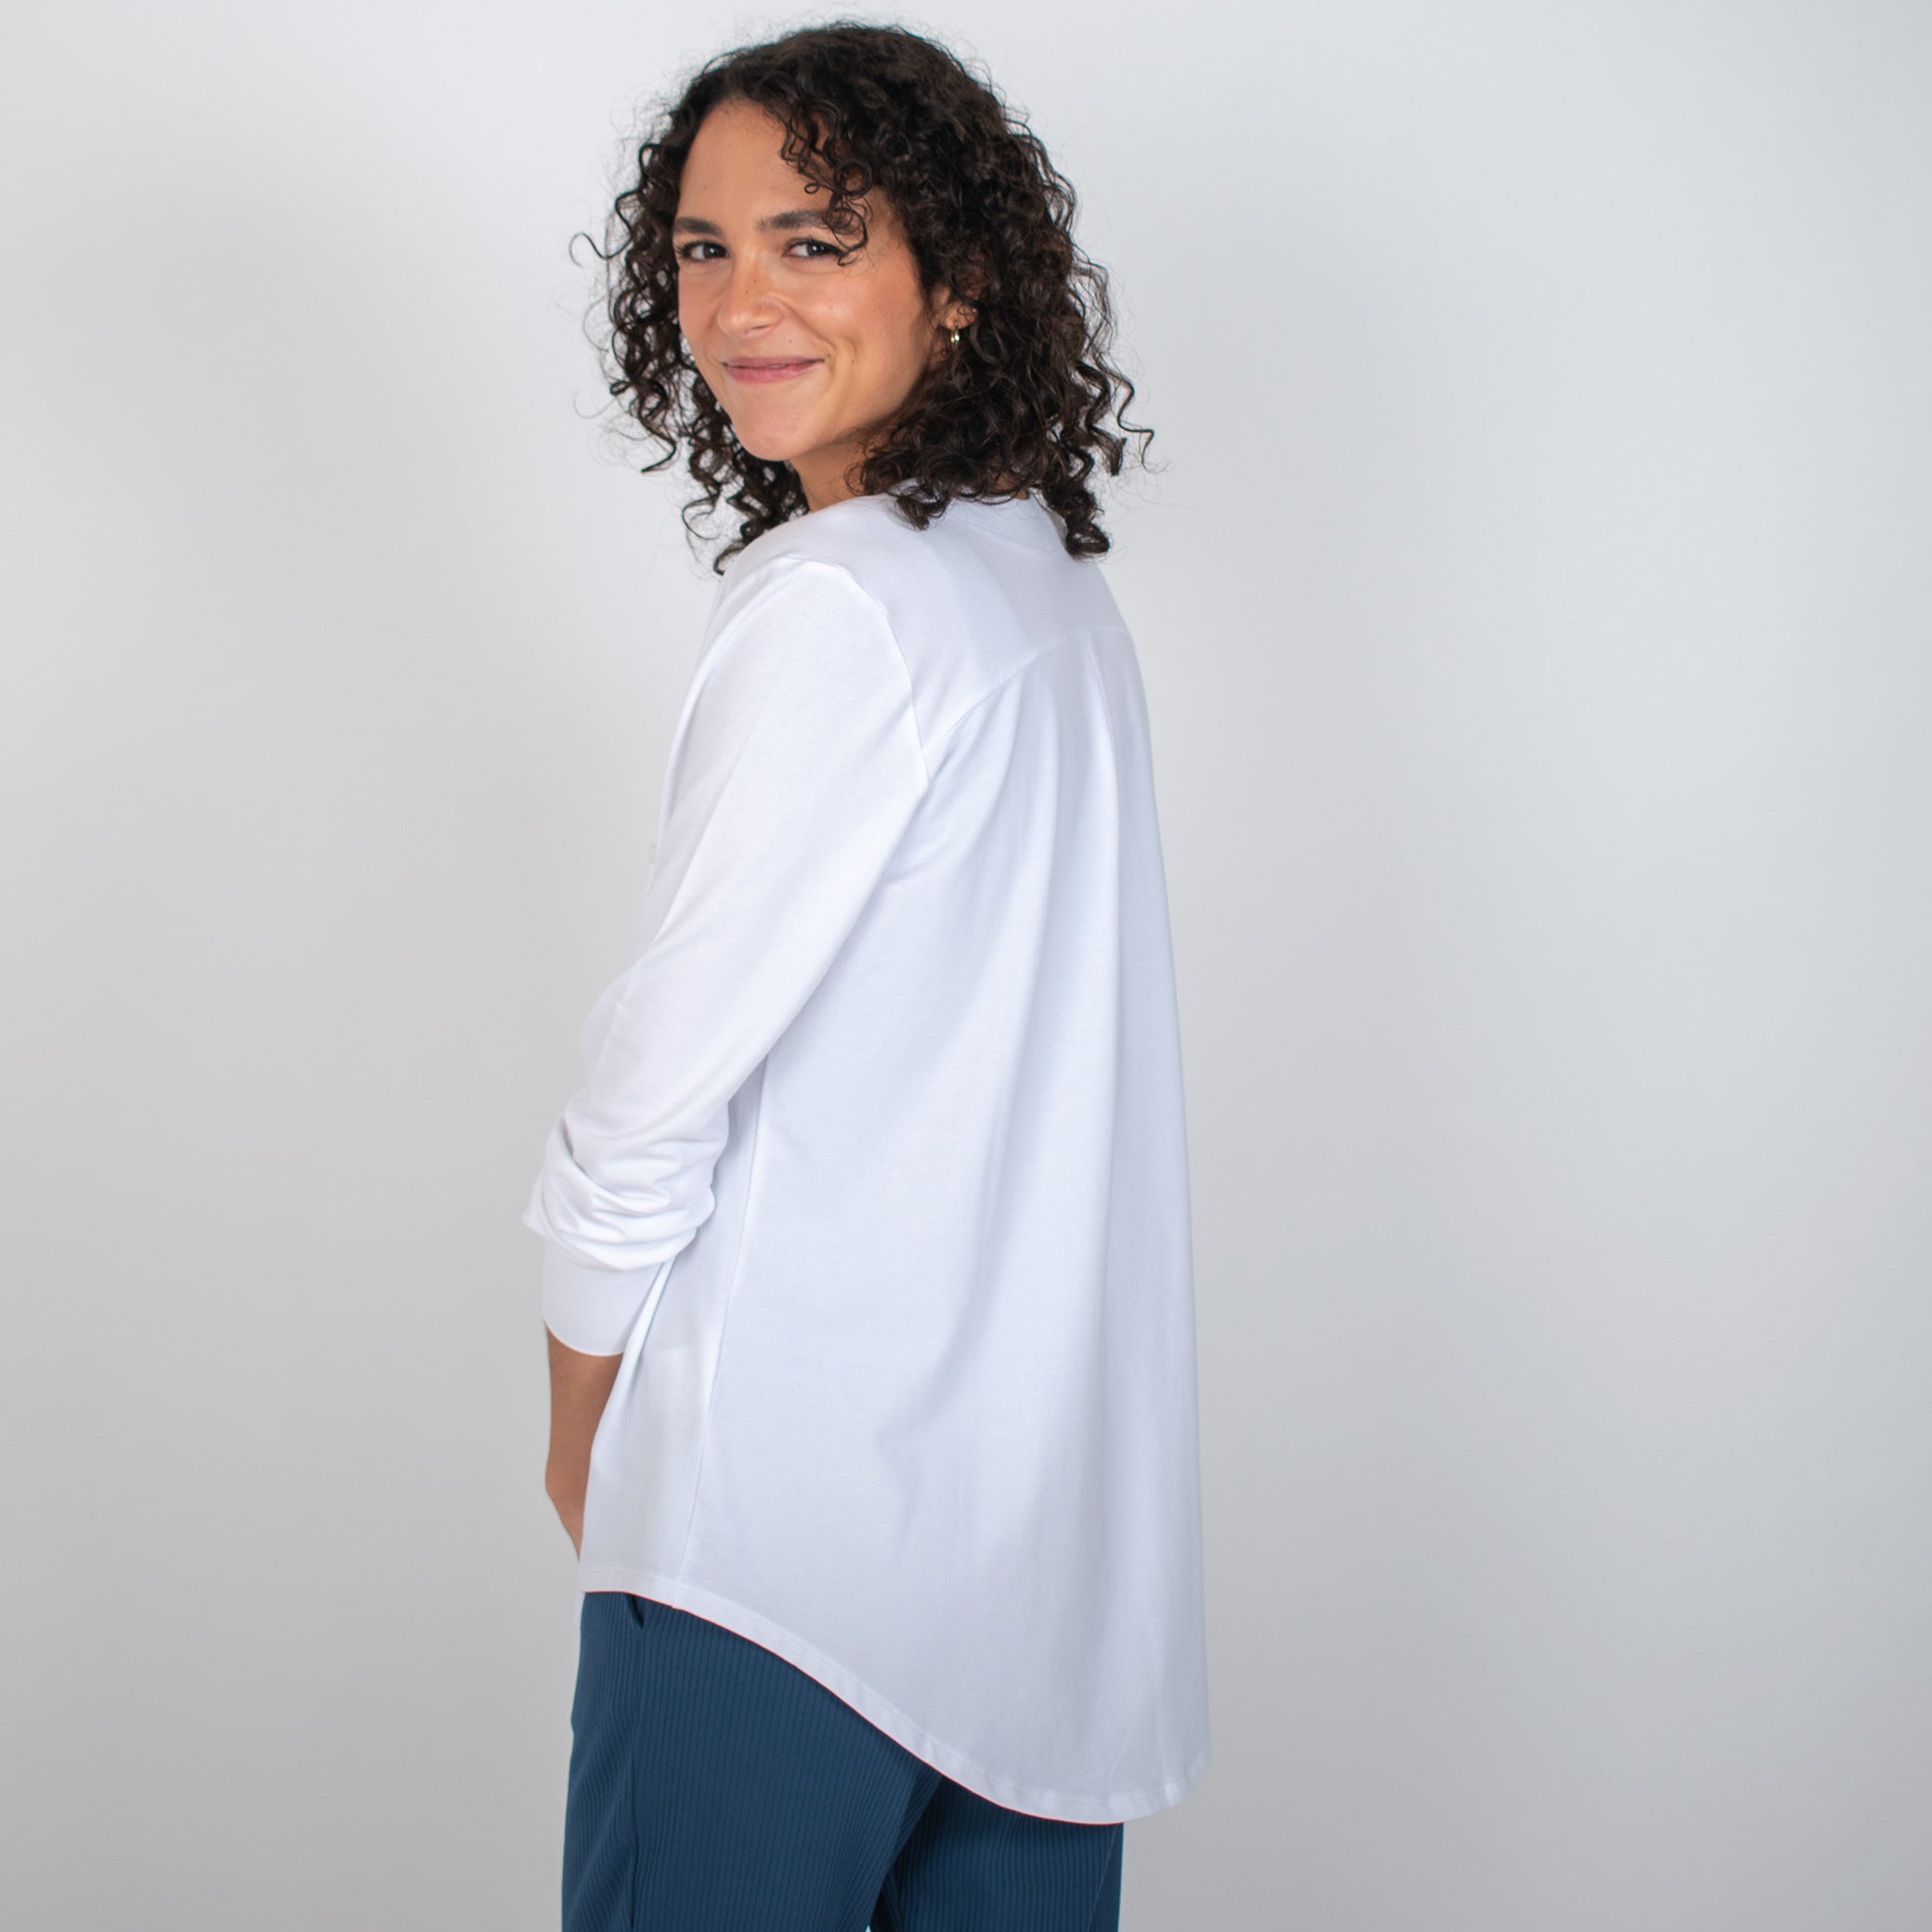 Woman wearing white long sleeve button up shirt with blue pants